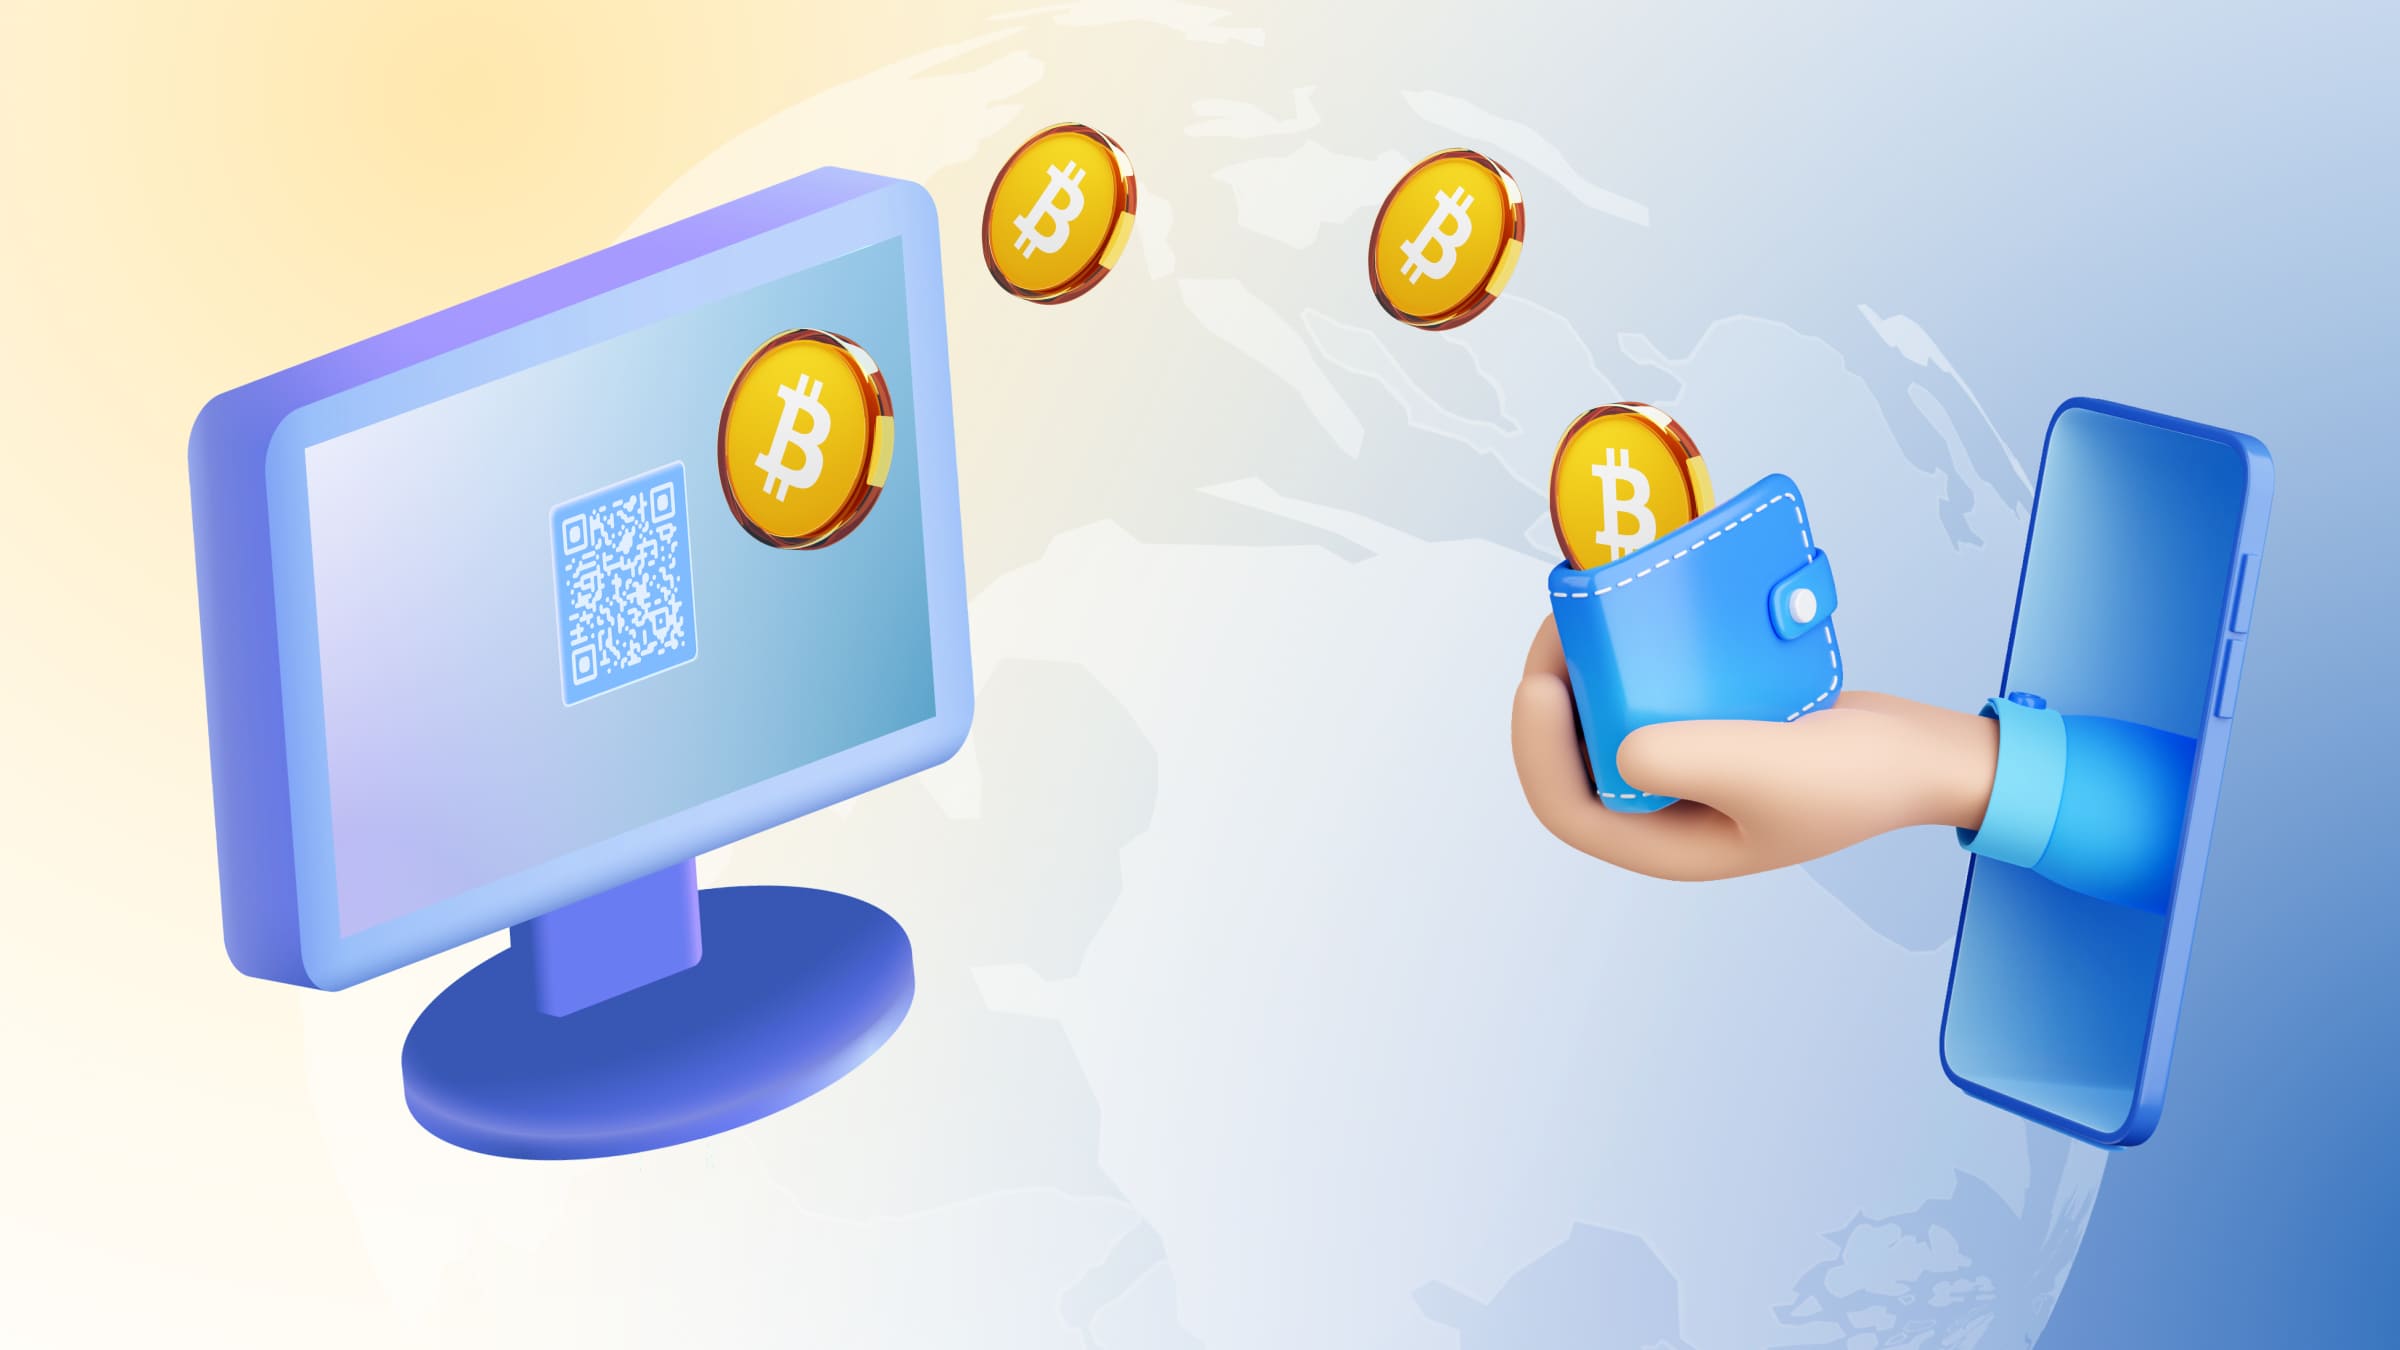 Cryptocurrency gains more and more popularity as a means of payment every day.